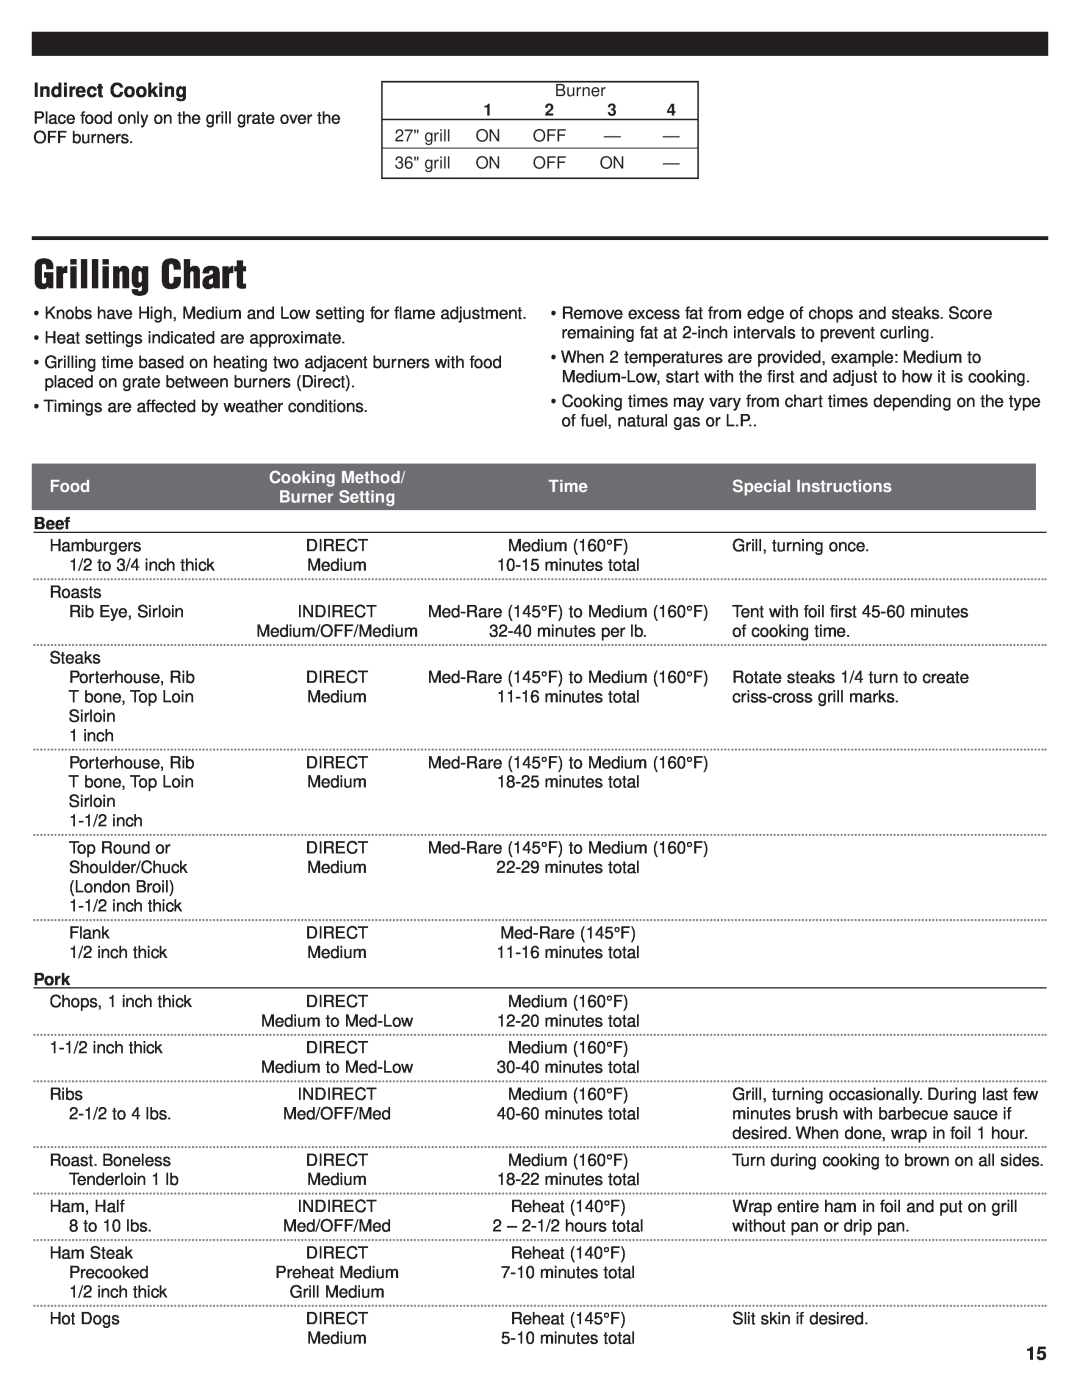 KitchenAid KBGN274, KFGR382 Grilling Chart, Indirect Cooking, Food, Cooking Method, Time, Special Instructions, Beef, Pork 